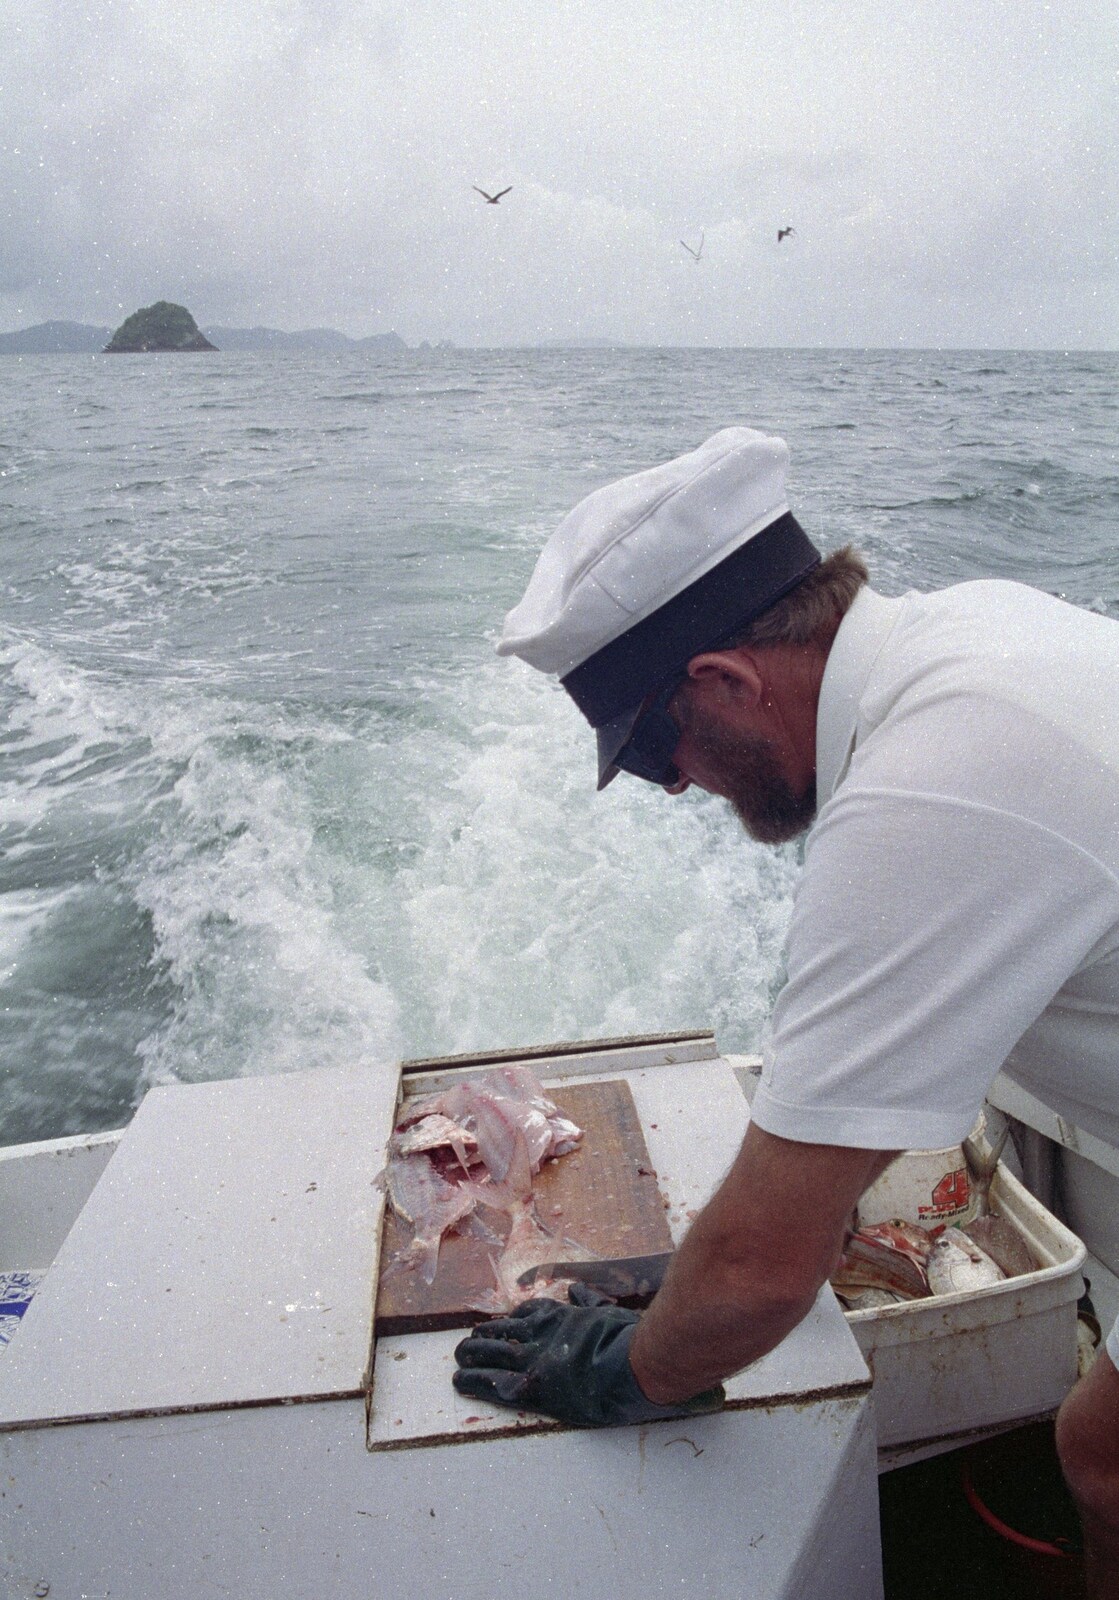 The skipper chops some fish up from Ferry Landing, Whitianga, New Zealand - 23rd November 1992